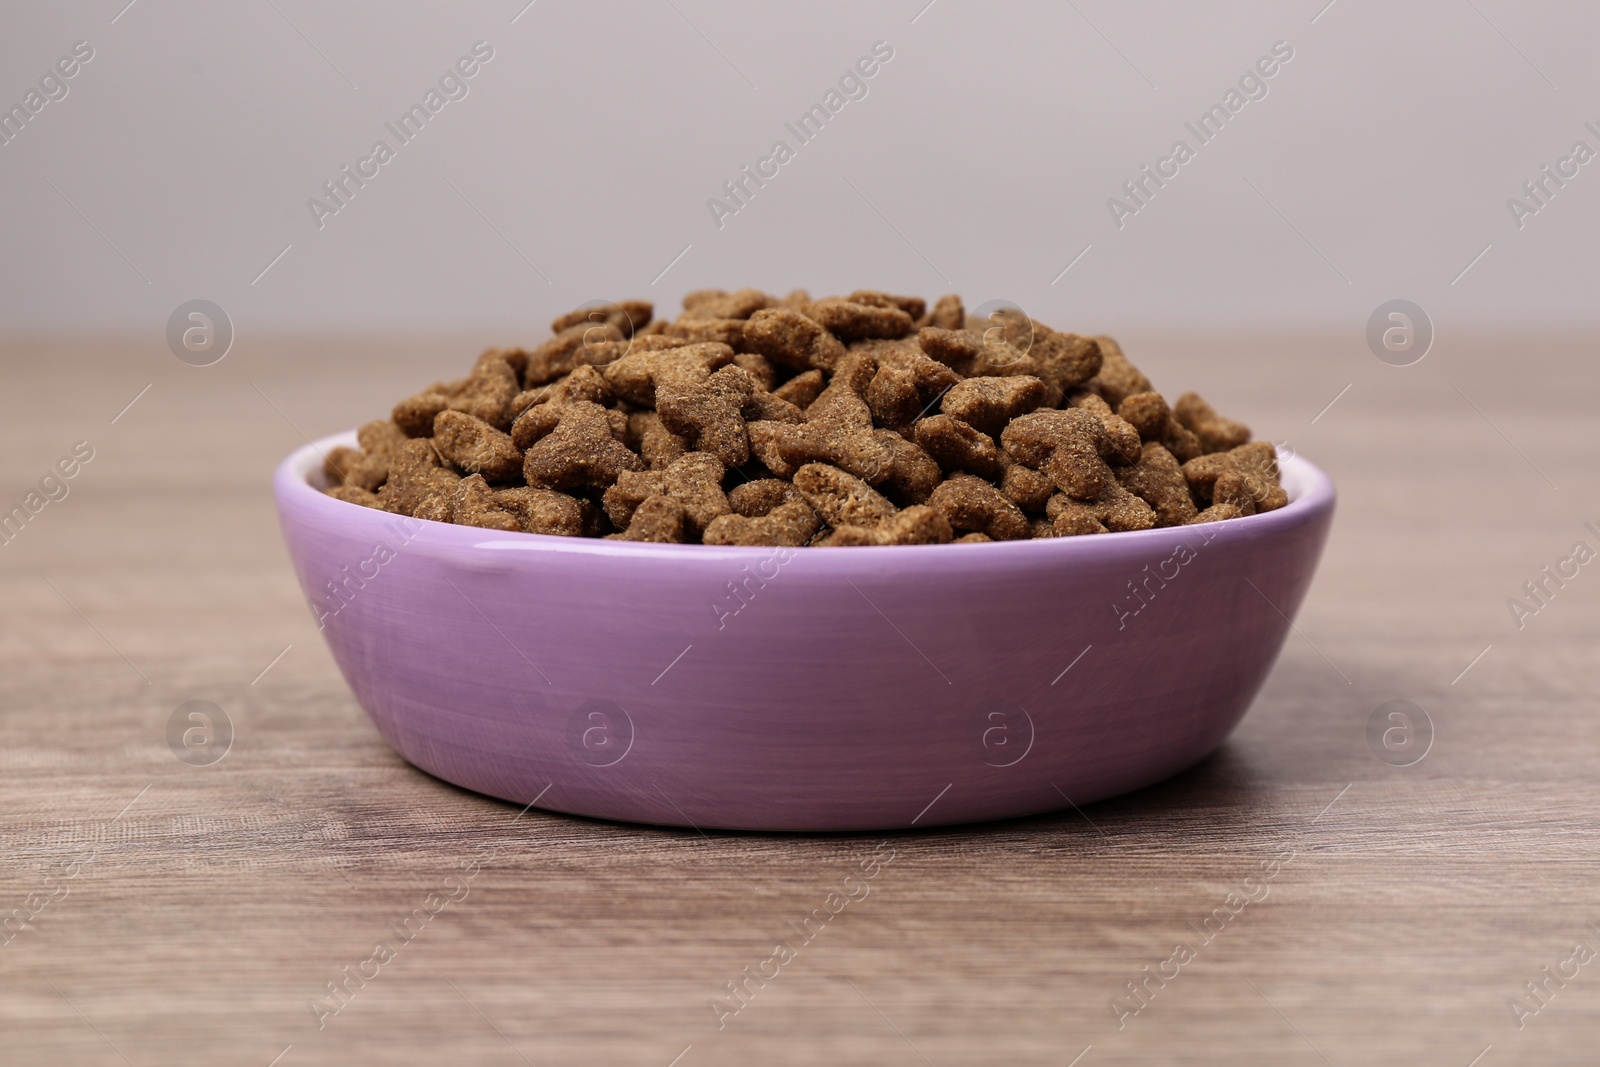 Photo of Dry food in violet pet bowl on wooden surface